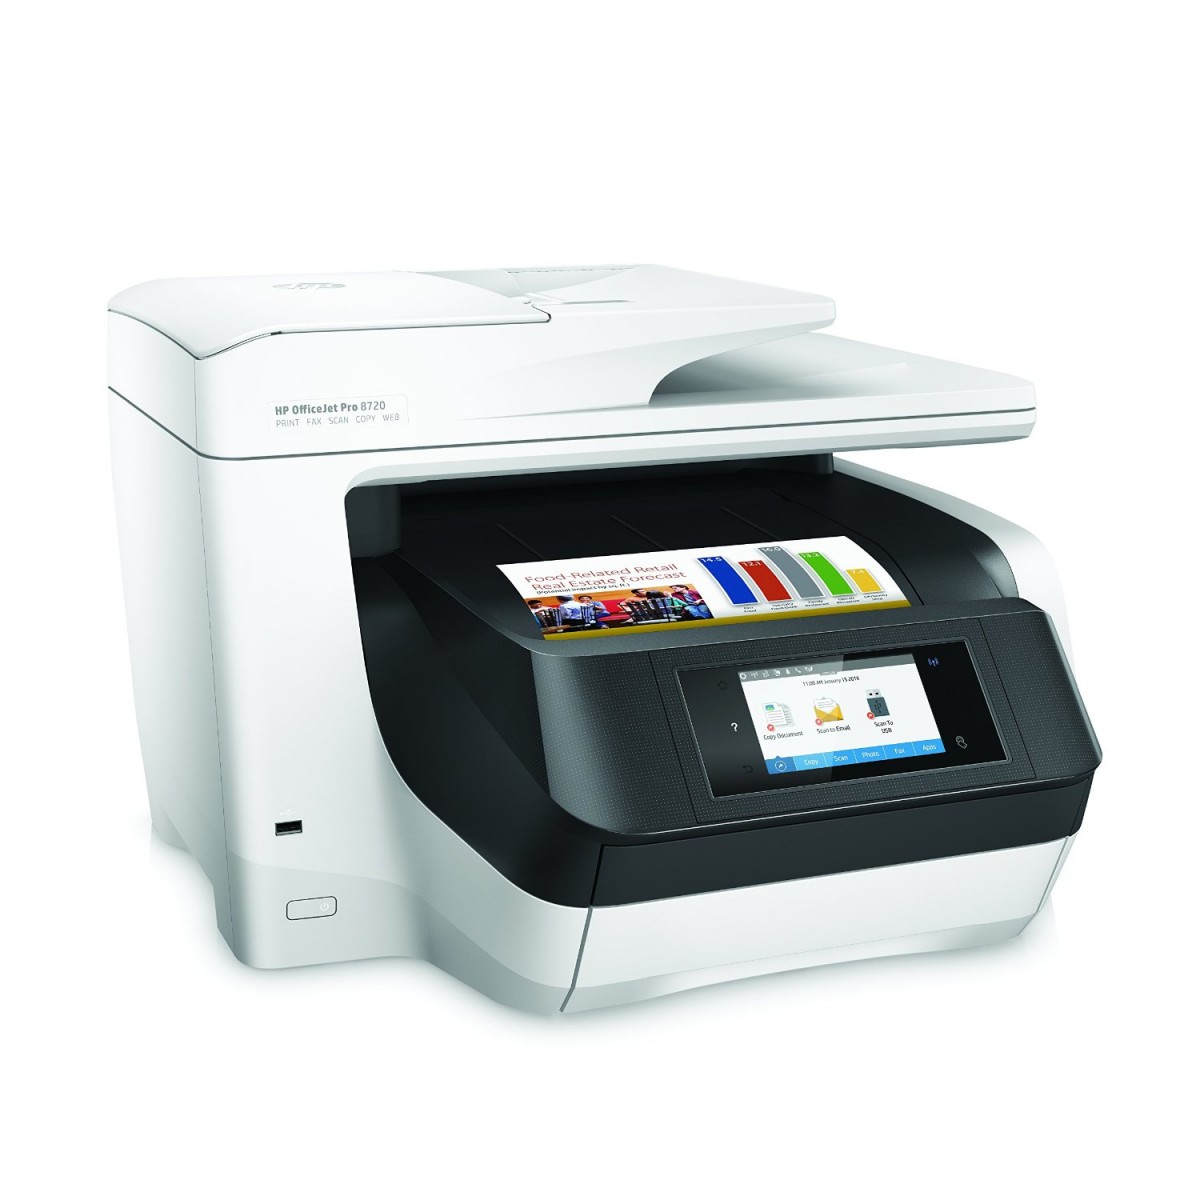 HP Officejet Pro 8720 Review